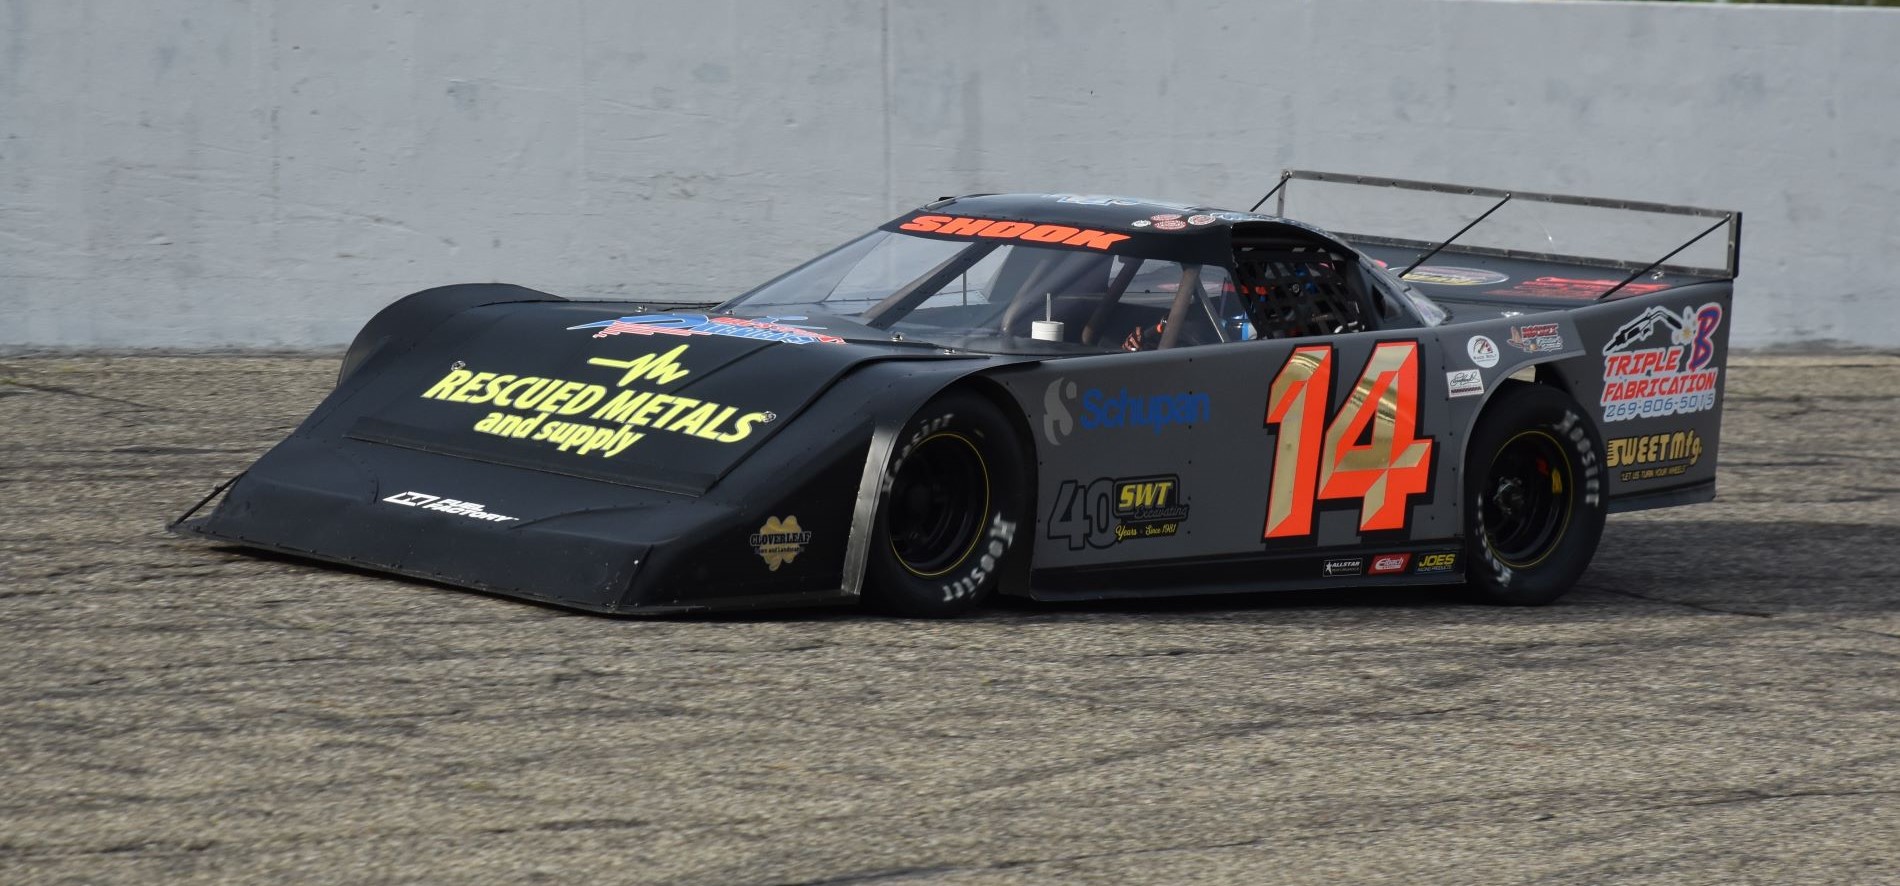 REVEAL THE HAMMER OUTLAW SUPER LATE MODELS MARTY JONES '75. Plus LM and FWD.